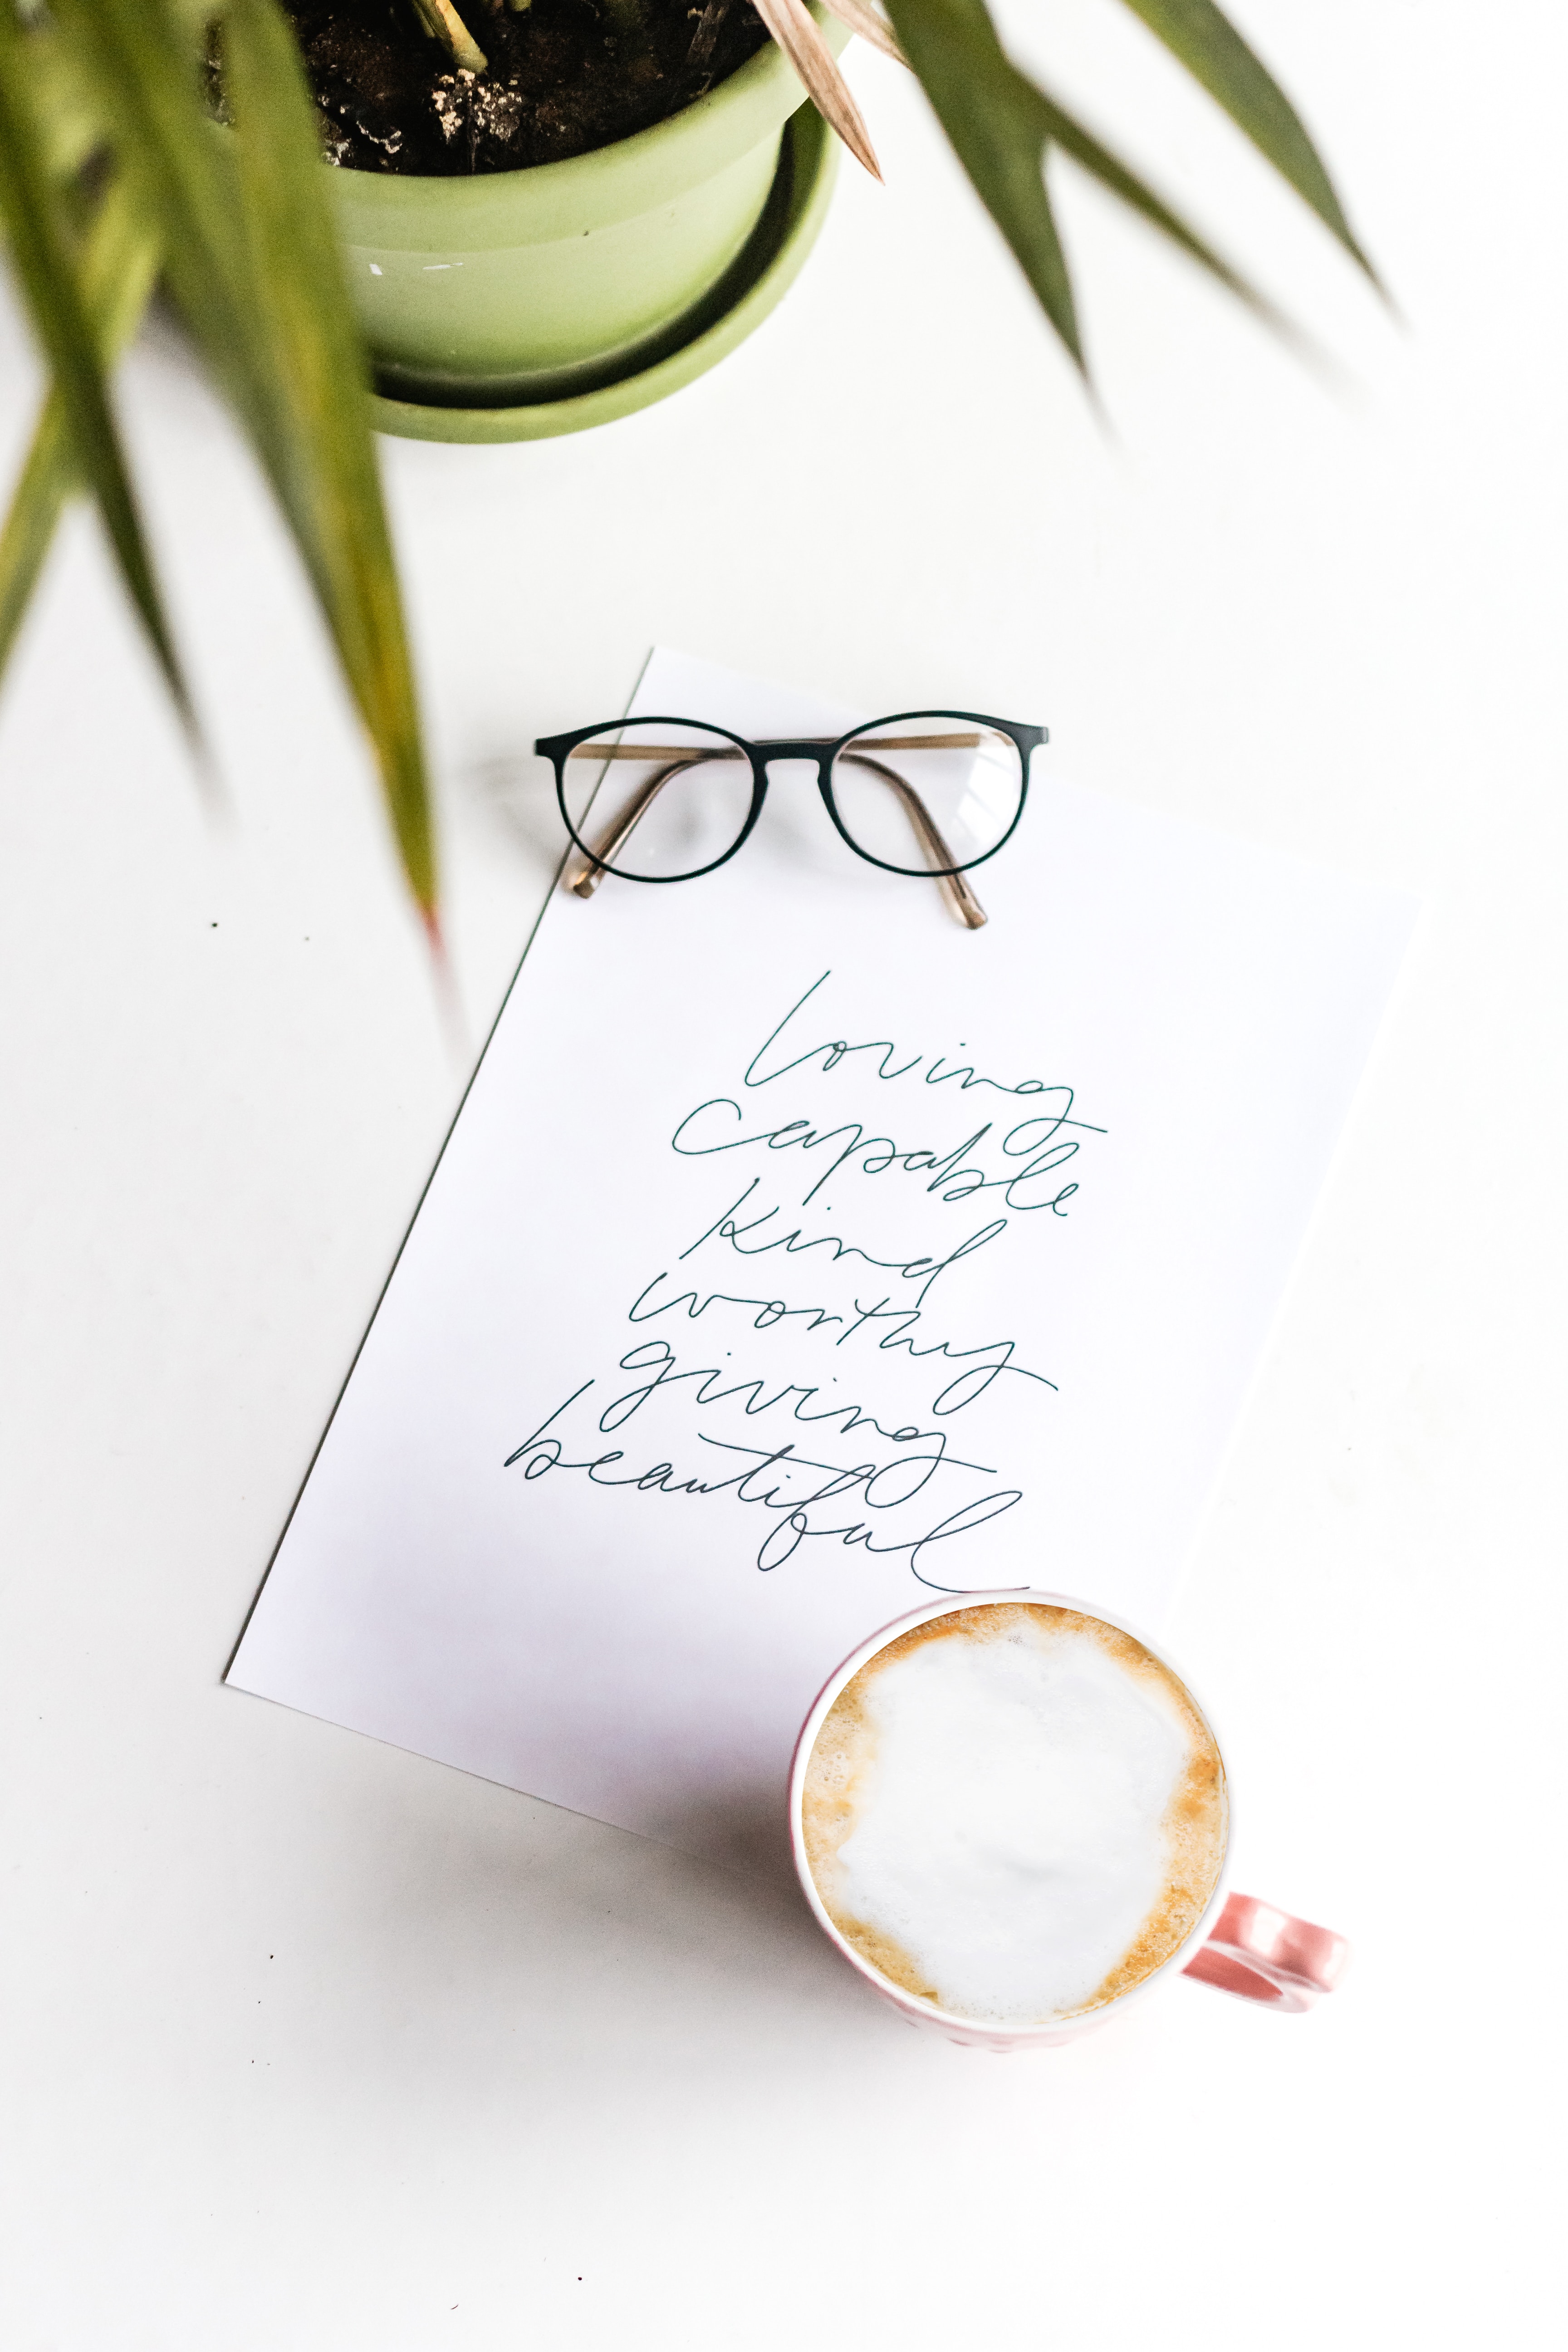 android words, cup, inscription, text, paper, glasses, spectacles